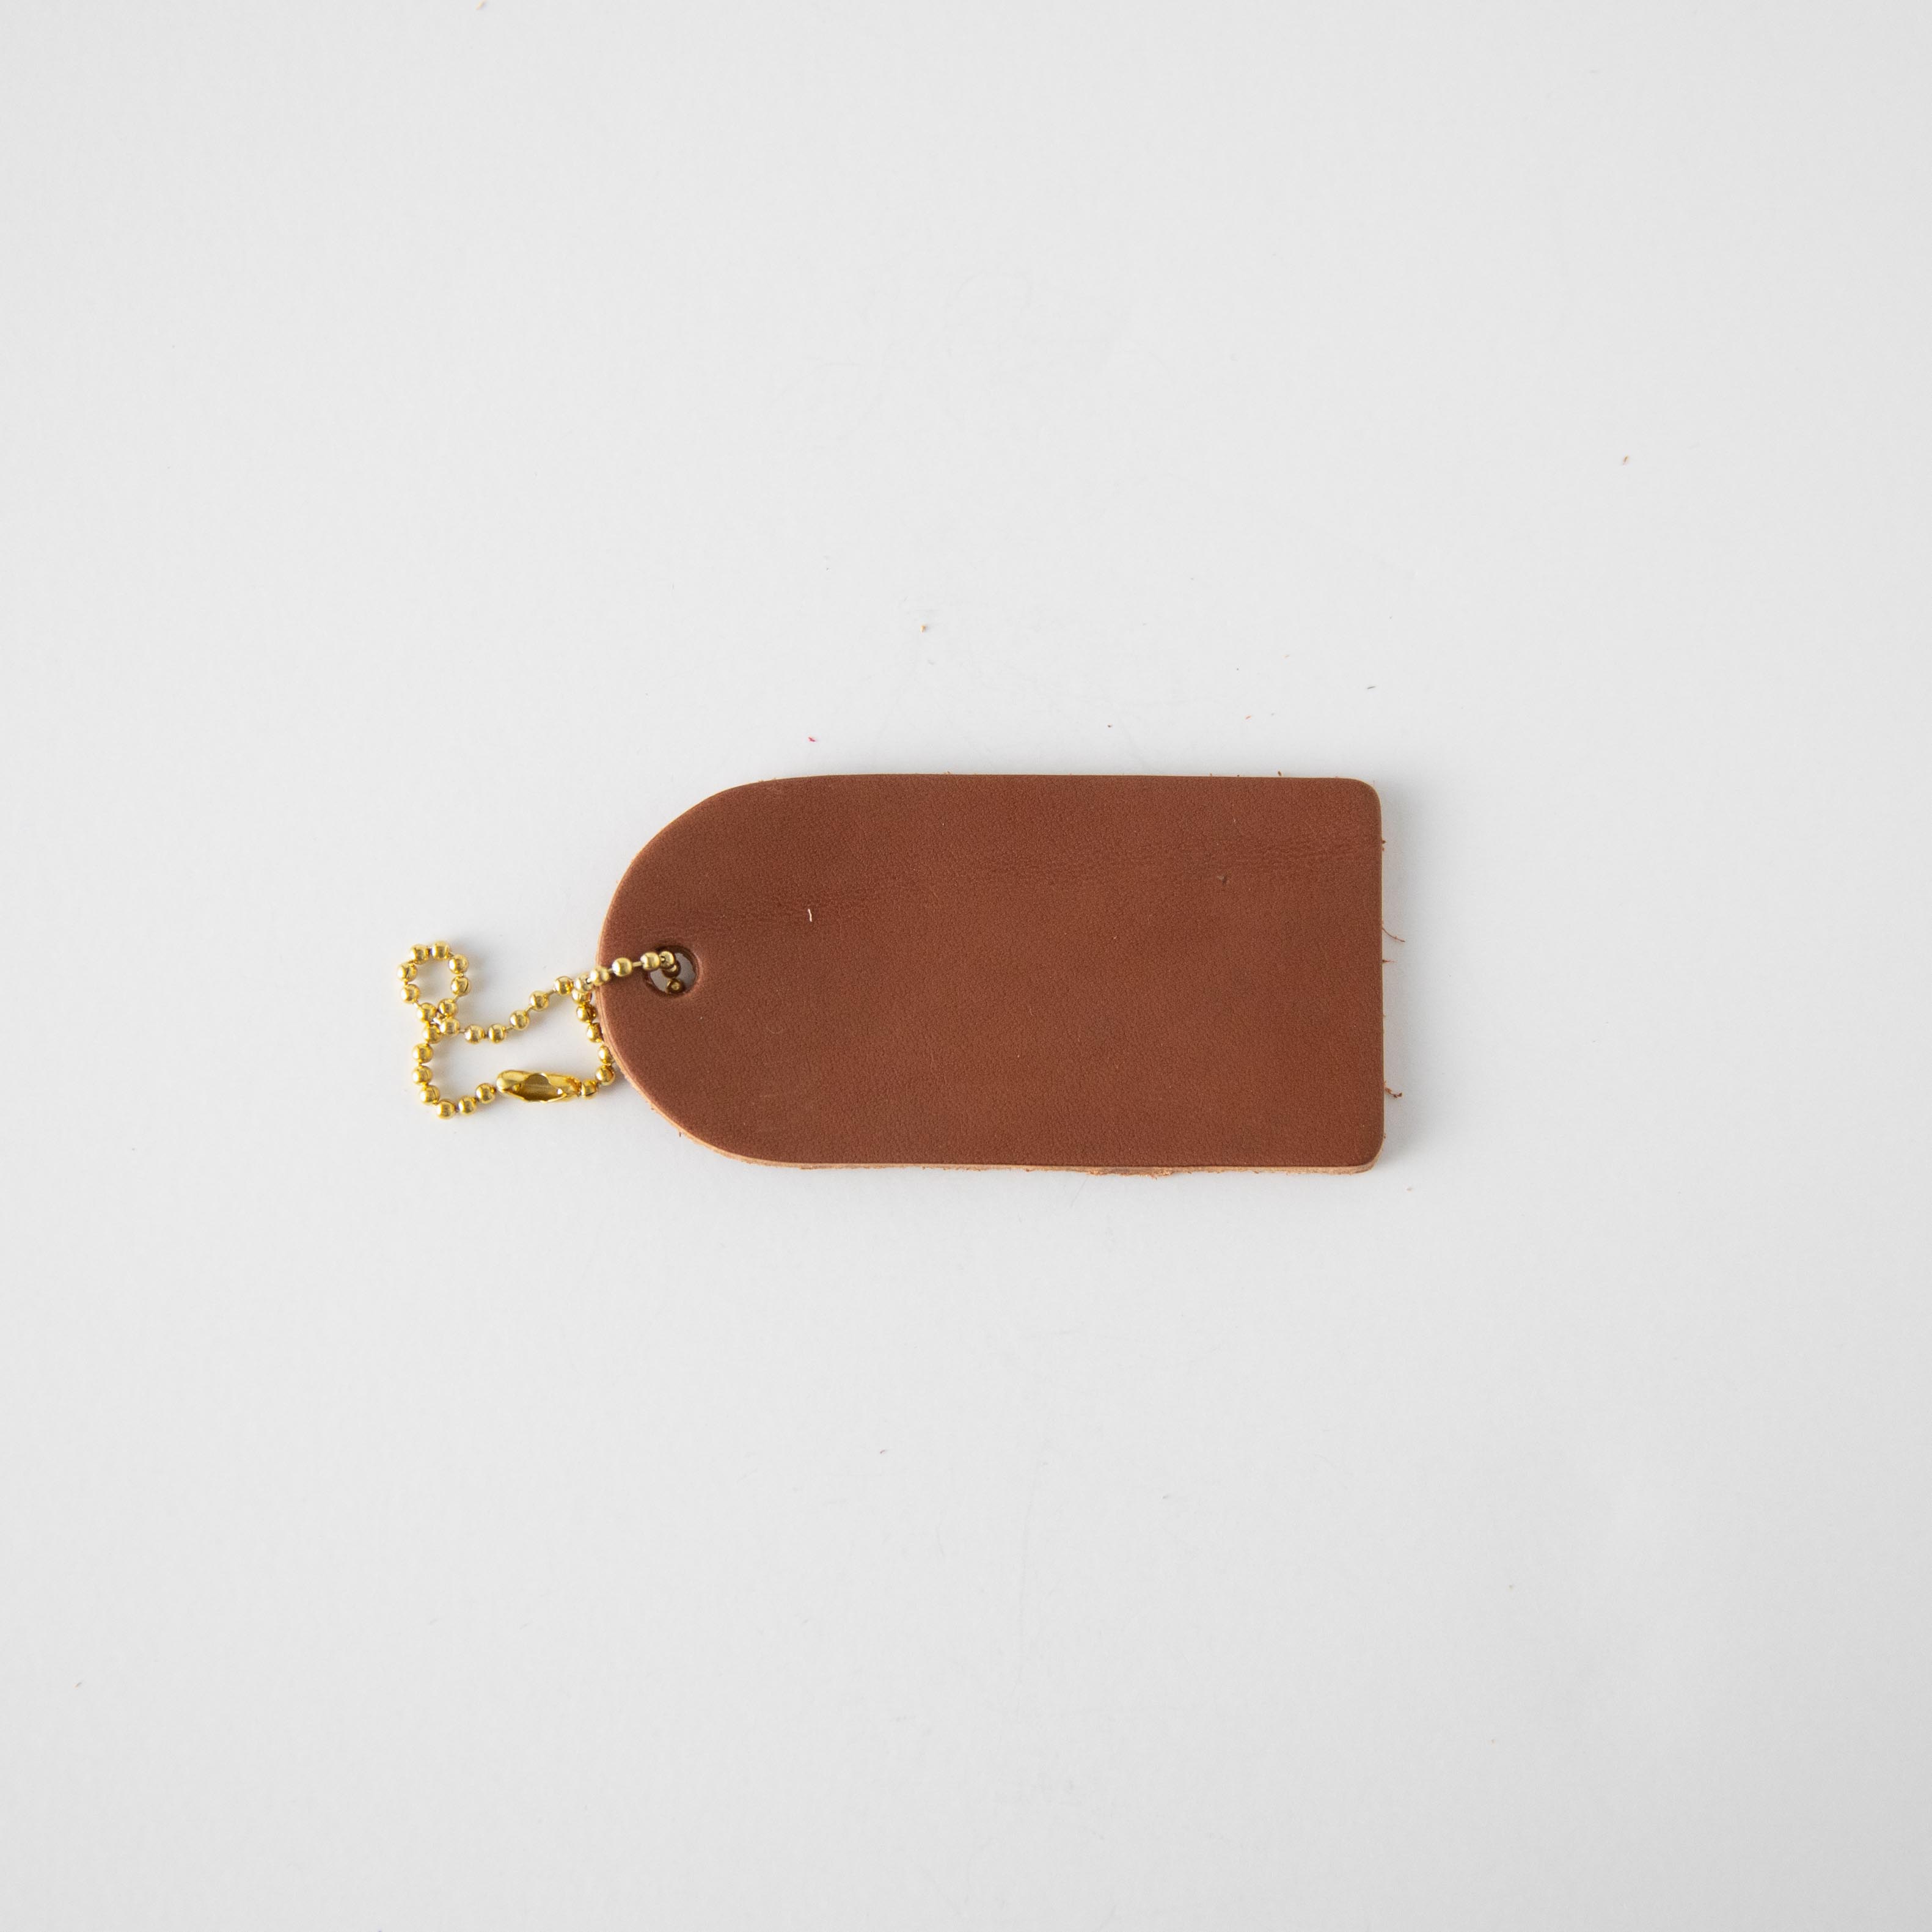 Clips for Bag/luggage Tags Louis Vuitton LV Luggage Tag -  Sweden